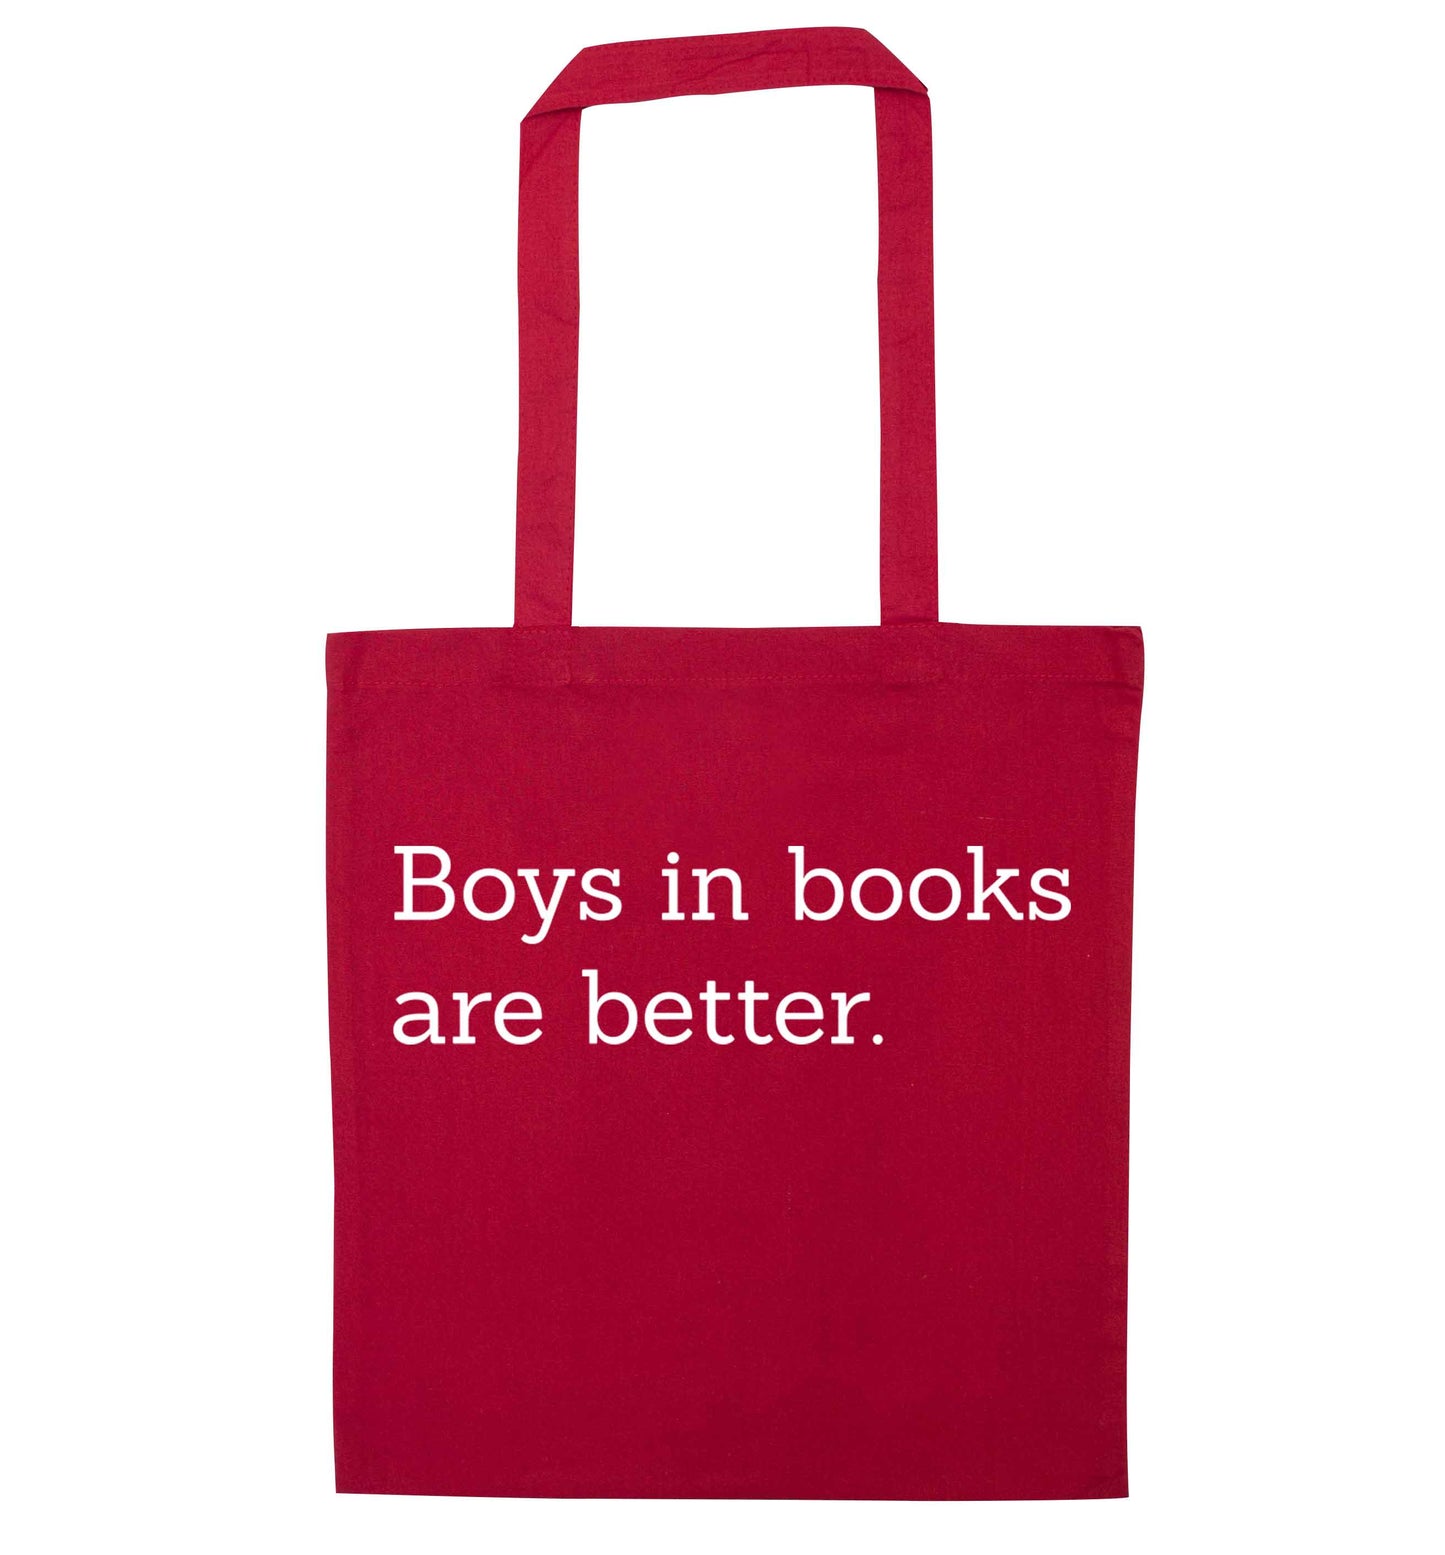 Boys in books are better red tote bag